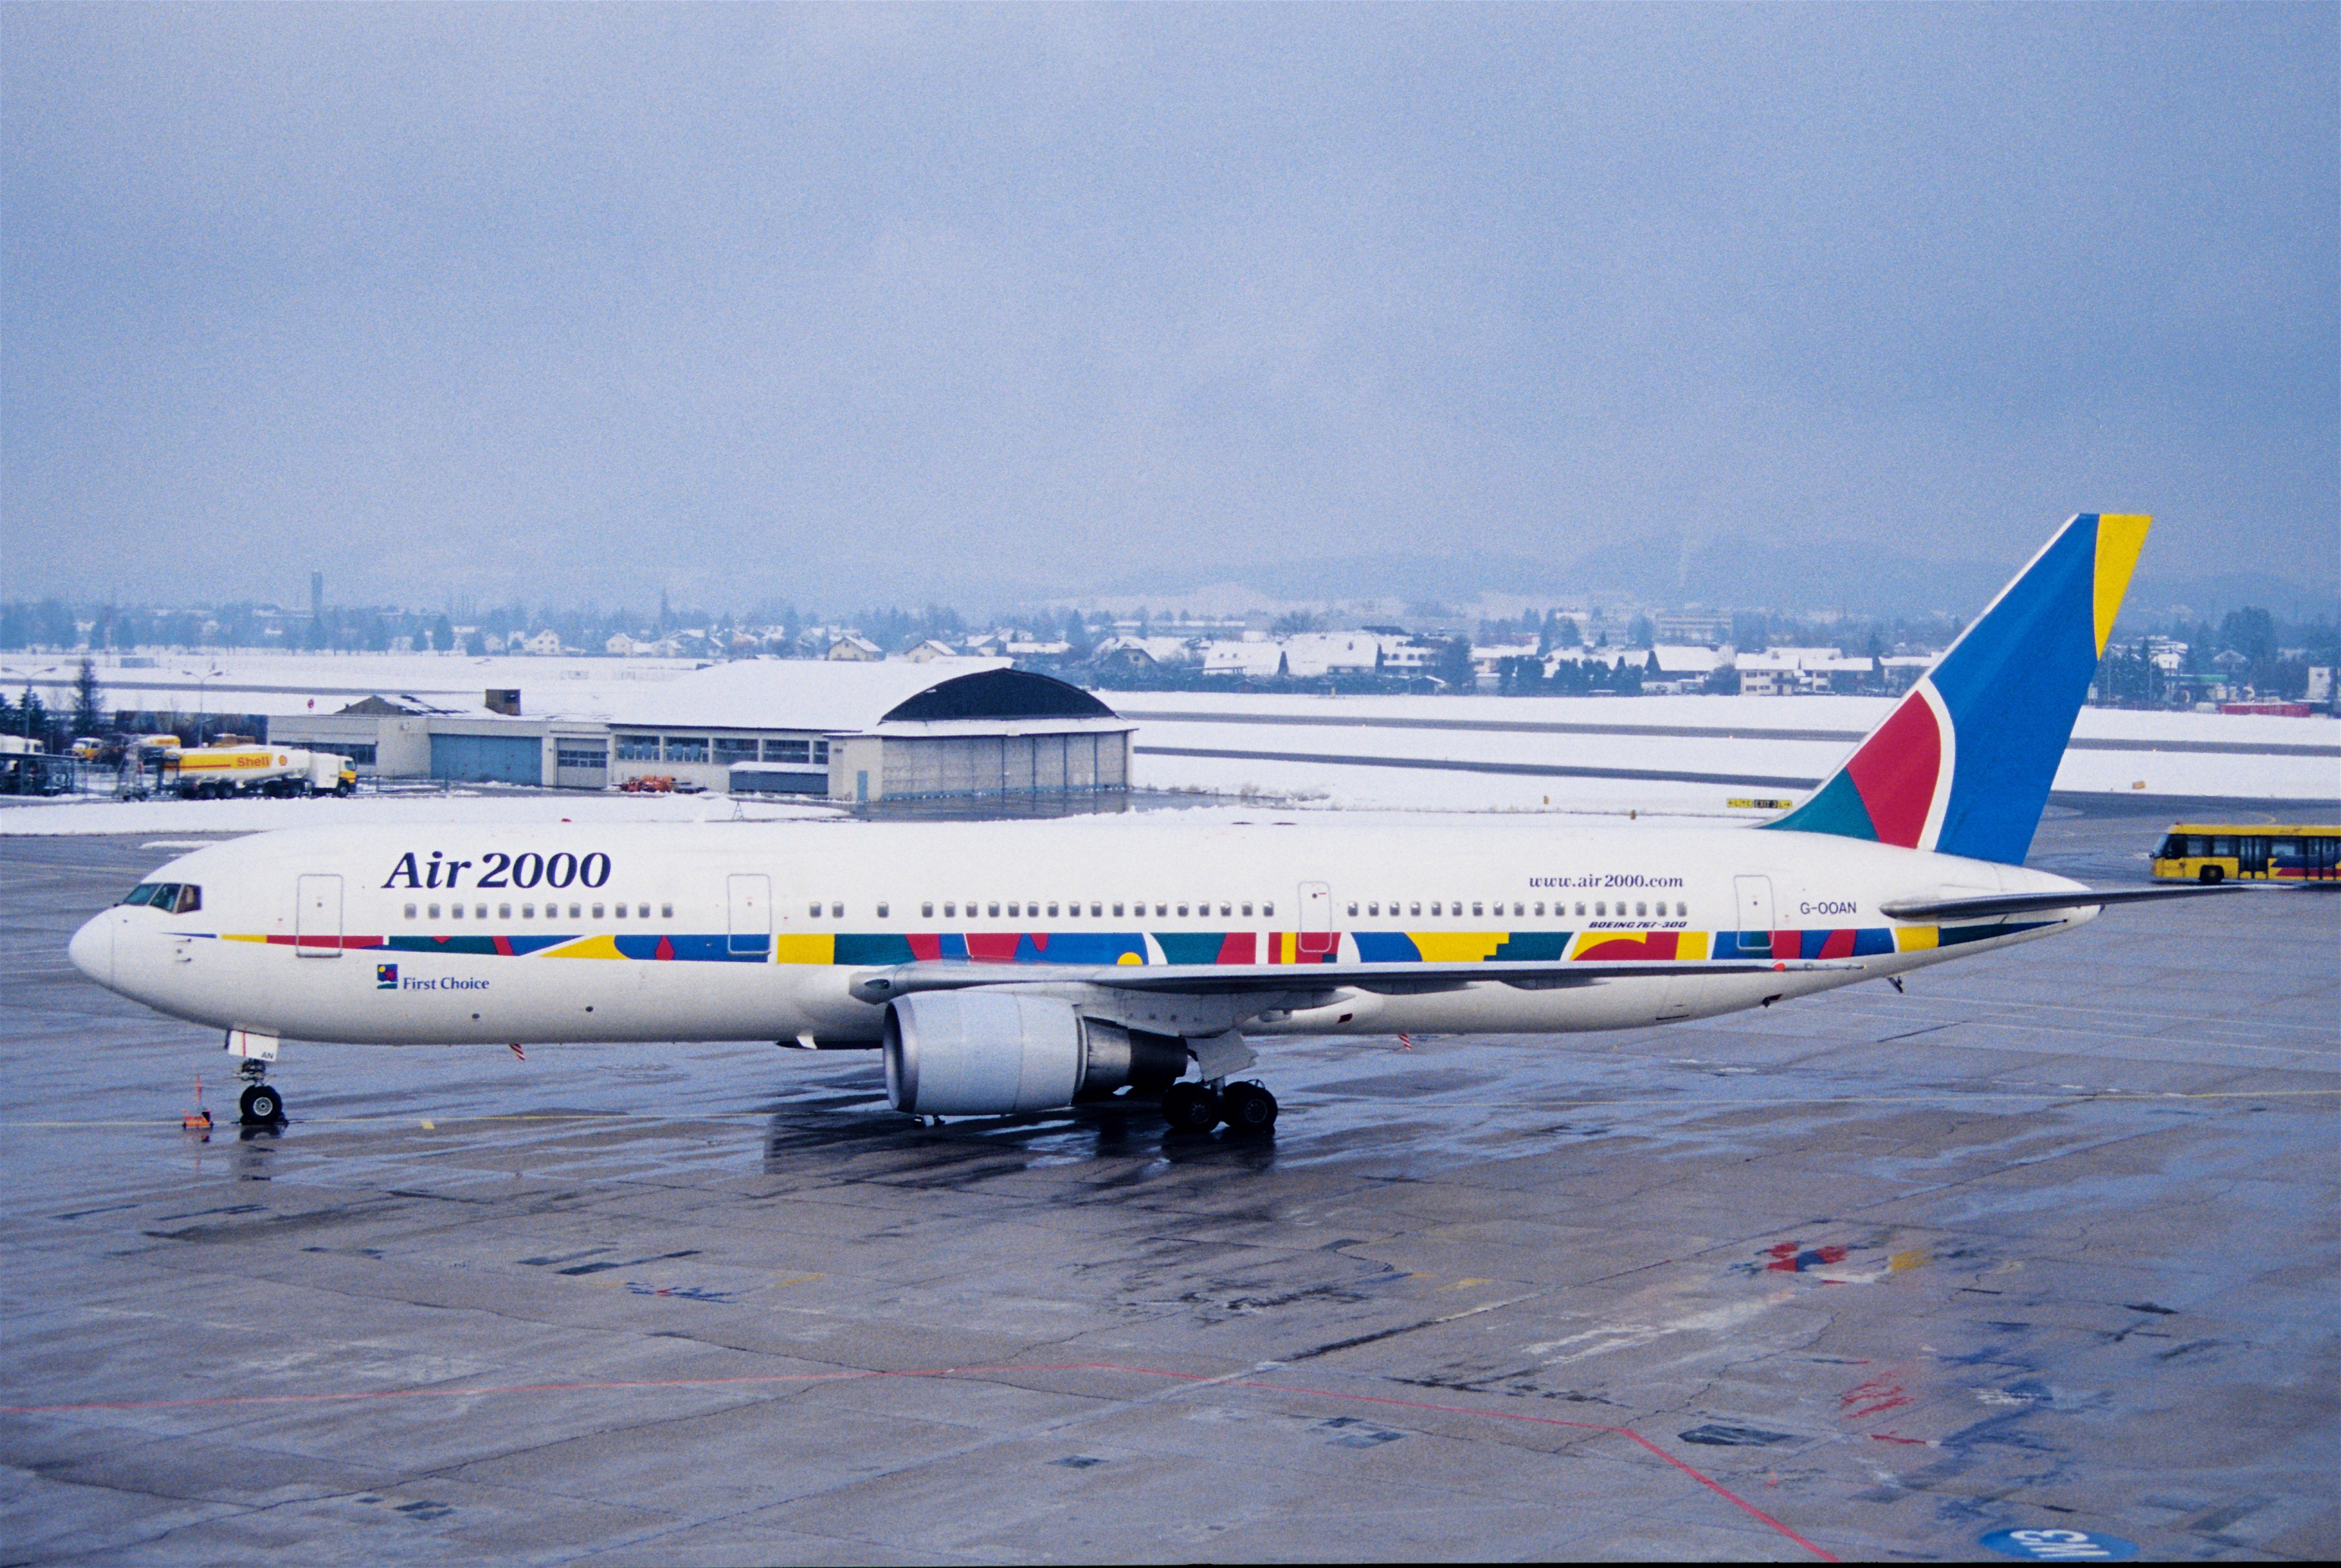 204aw - Air 2000 Boeing 767-300, G-OOAN@SZG,25.1.2003 - Flickr - Aero Icarus